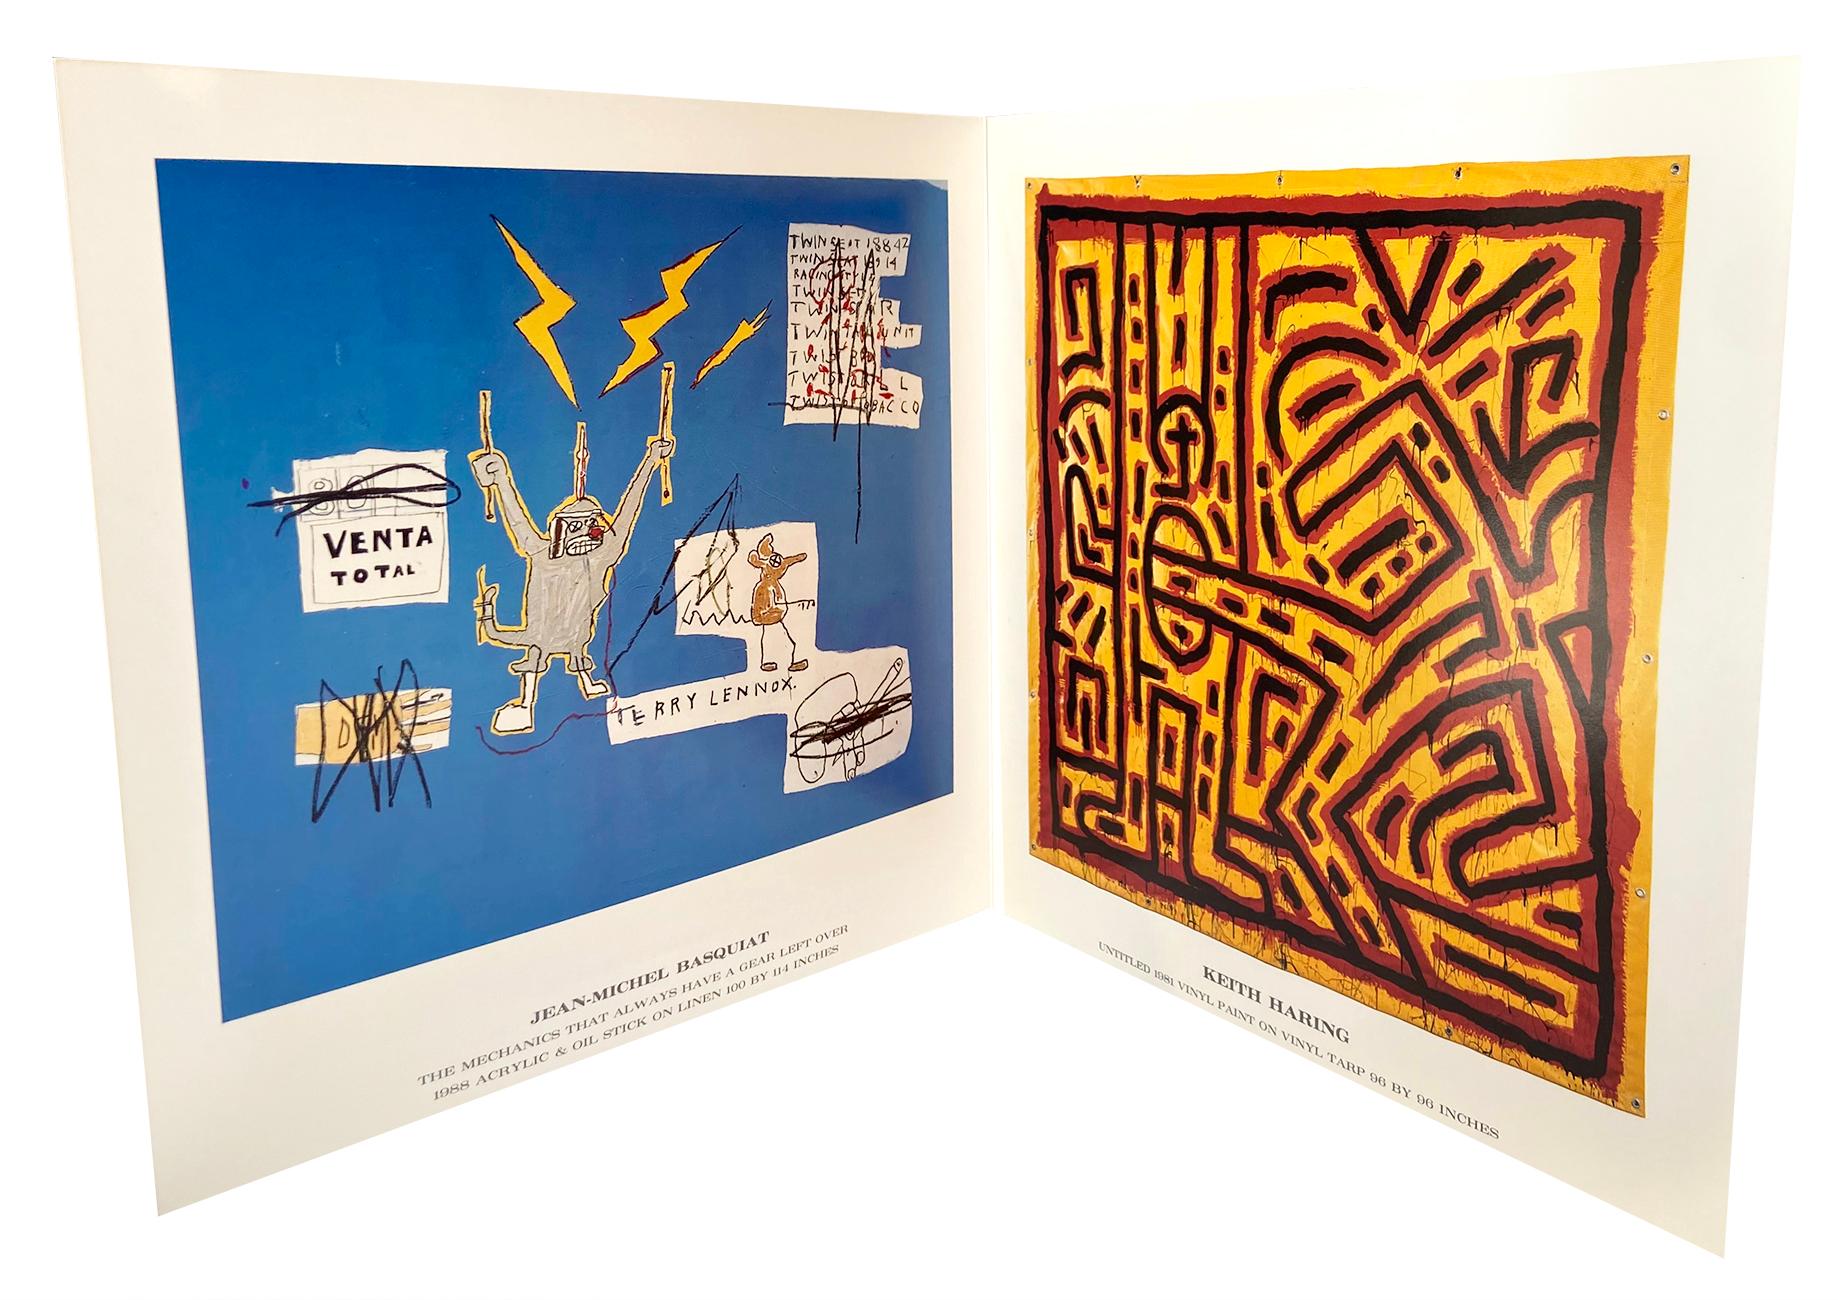 Basquiat Keith Haring Tony Shafrazi Gallery 1991 (Basquiat Keith Haring 1991) - Print by (after) Jean-Michel Basquiat